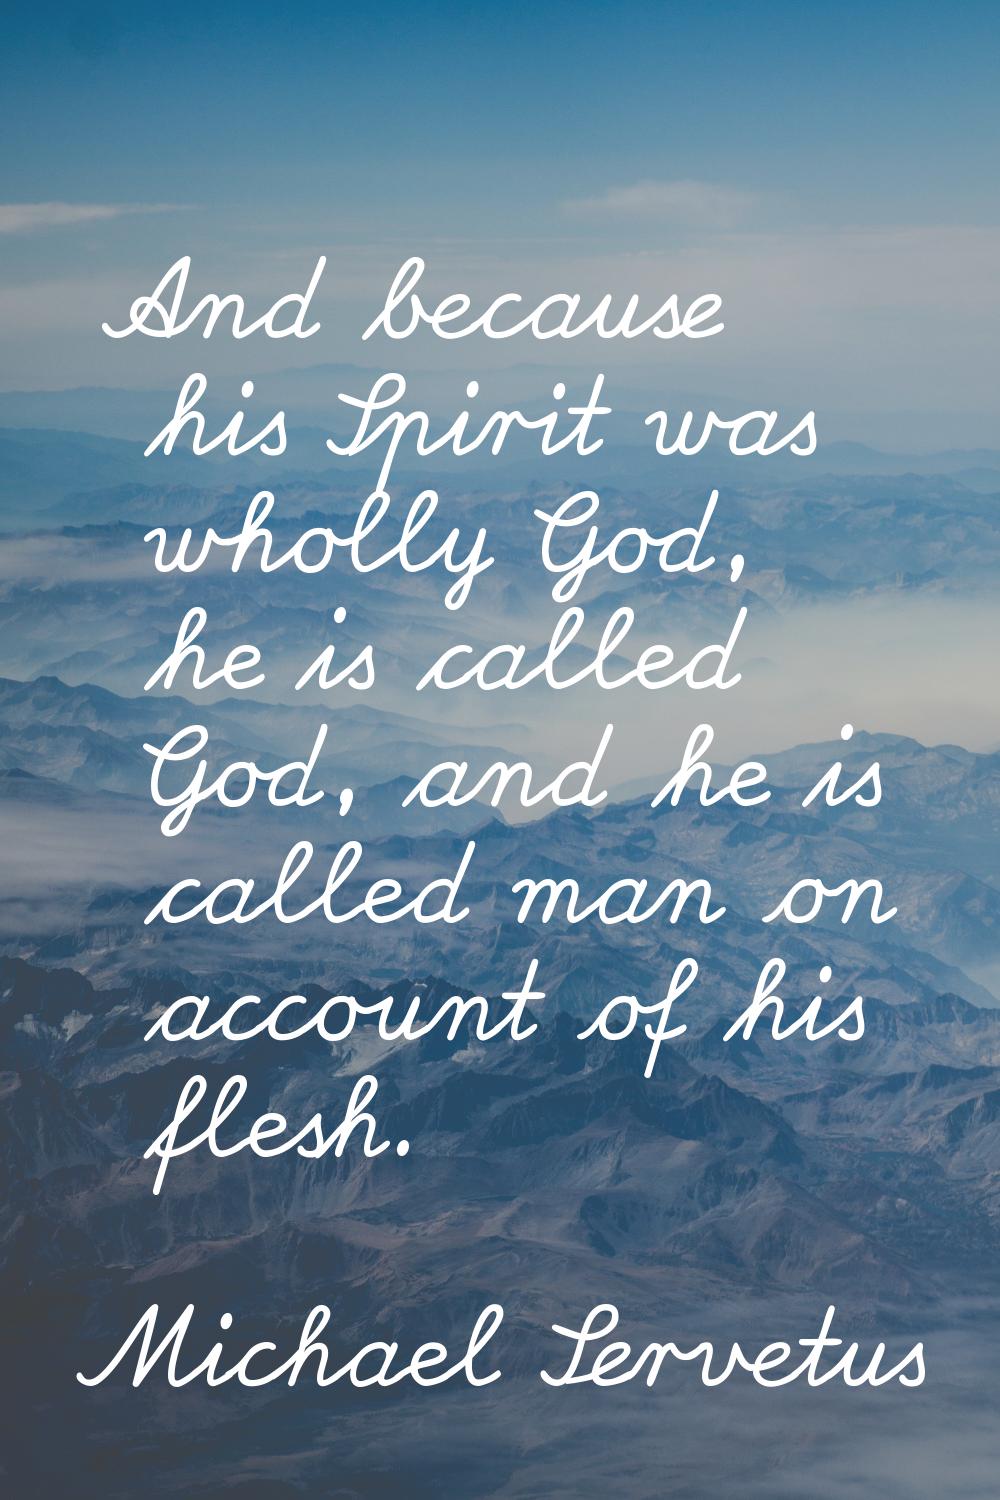 And because his Spirit was wholly God, he is called God, and he is called man on account of his fle